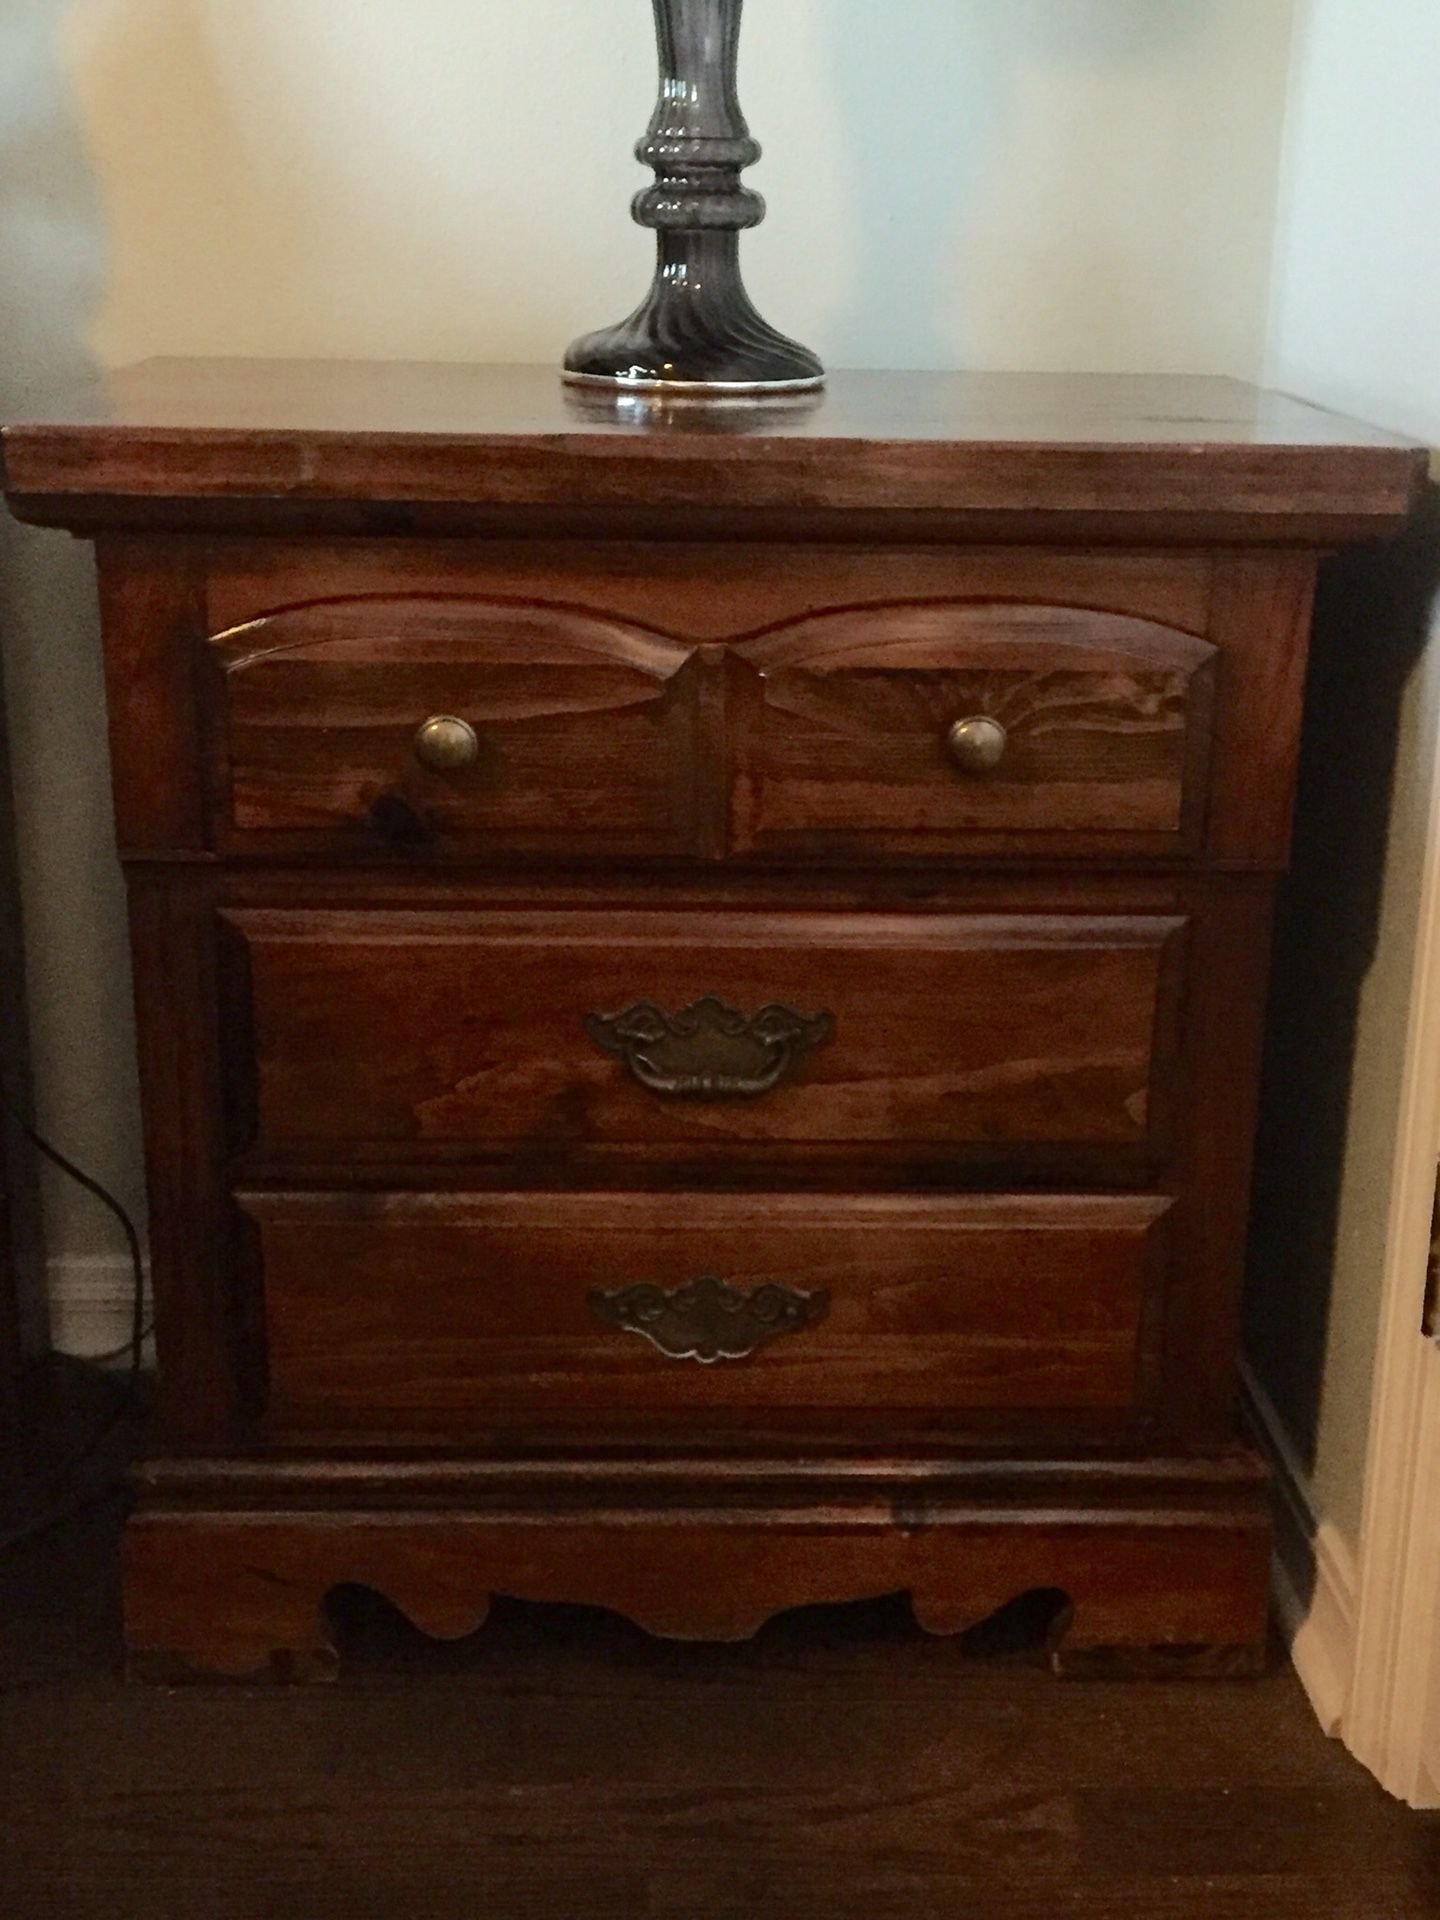 Reduced - Must Sell: Very nice solid wood bedroom set- still available - $500